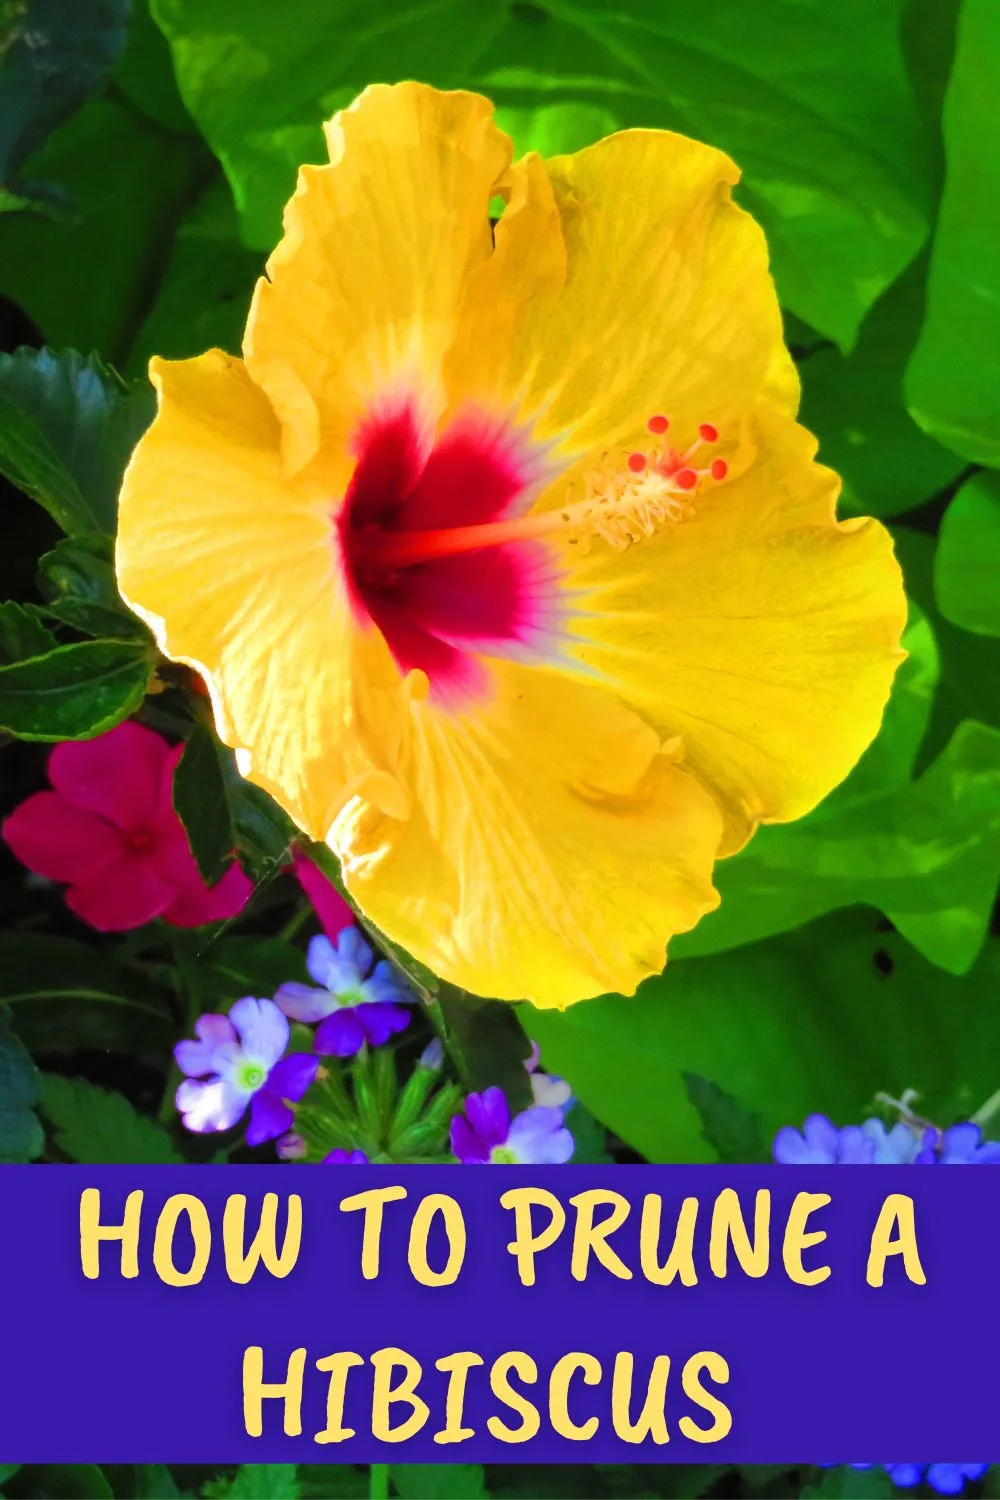 How to prune a hibiscus